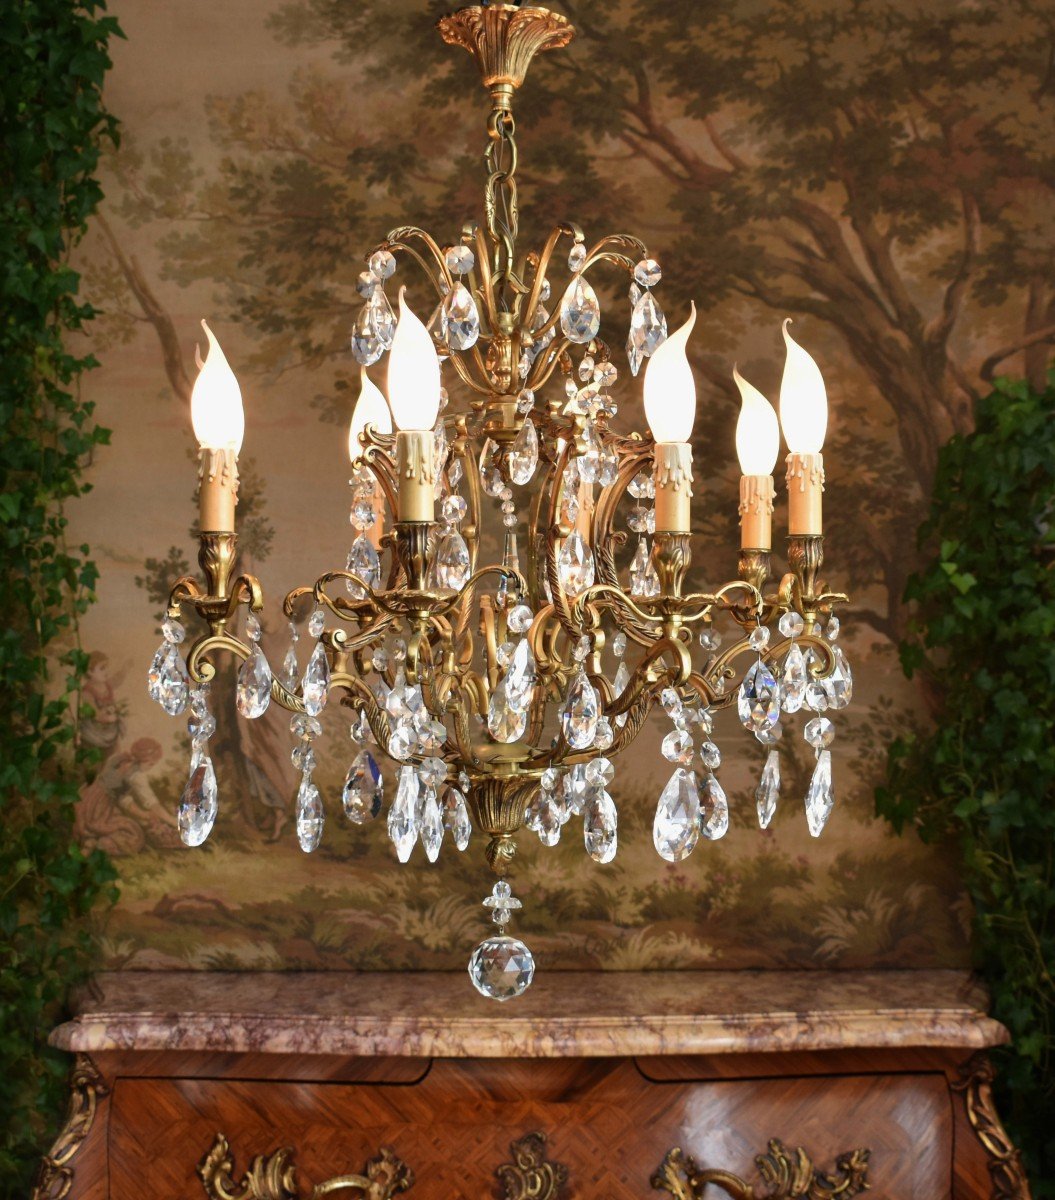 Large Bronze Chandelier And Cage Shaped Pendants, 8 Arms Of Light, Eight Lights.